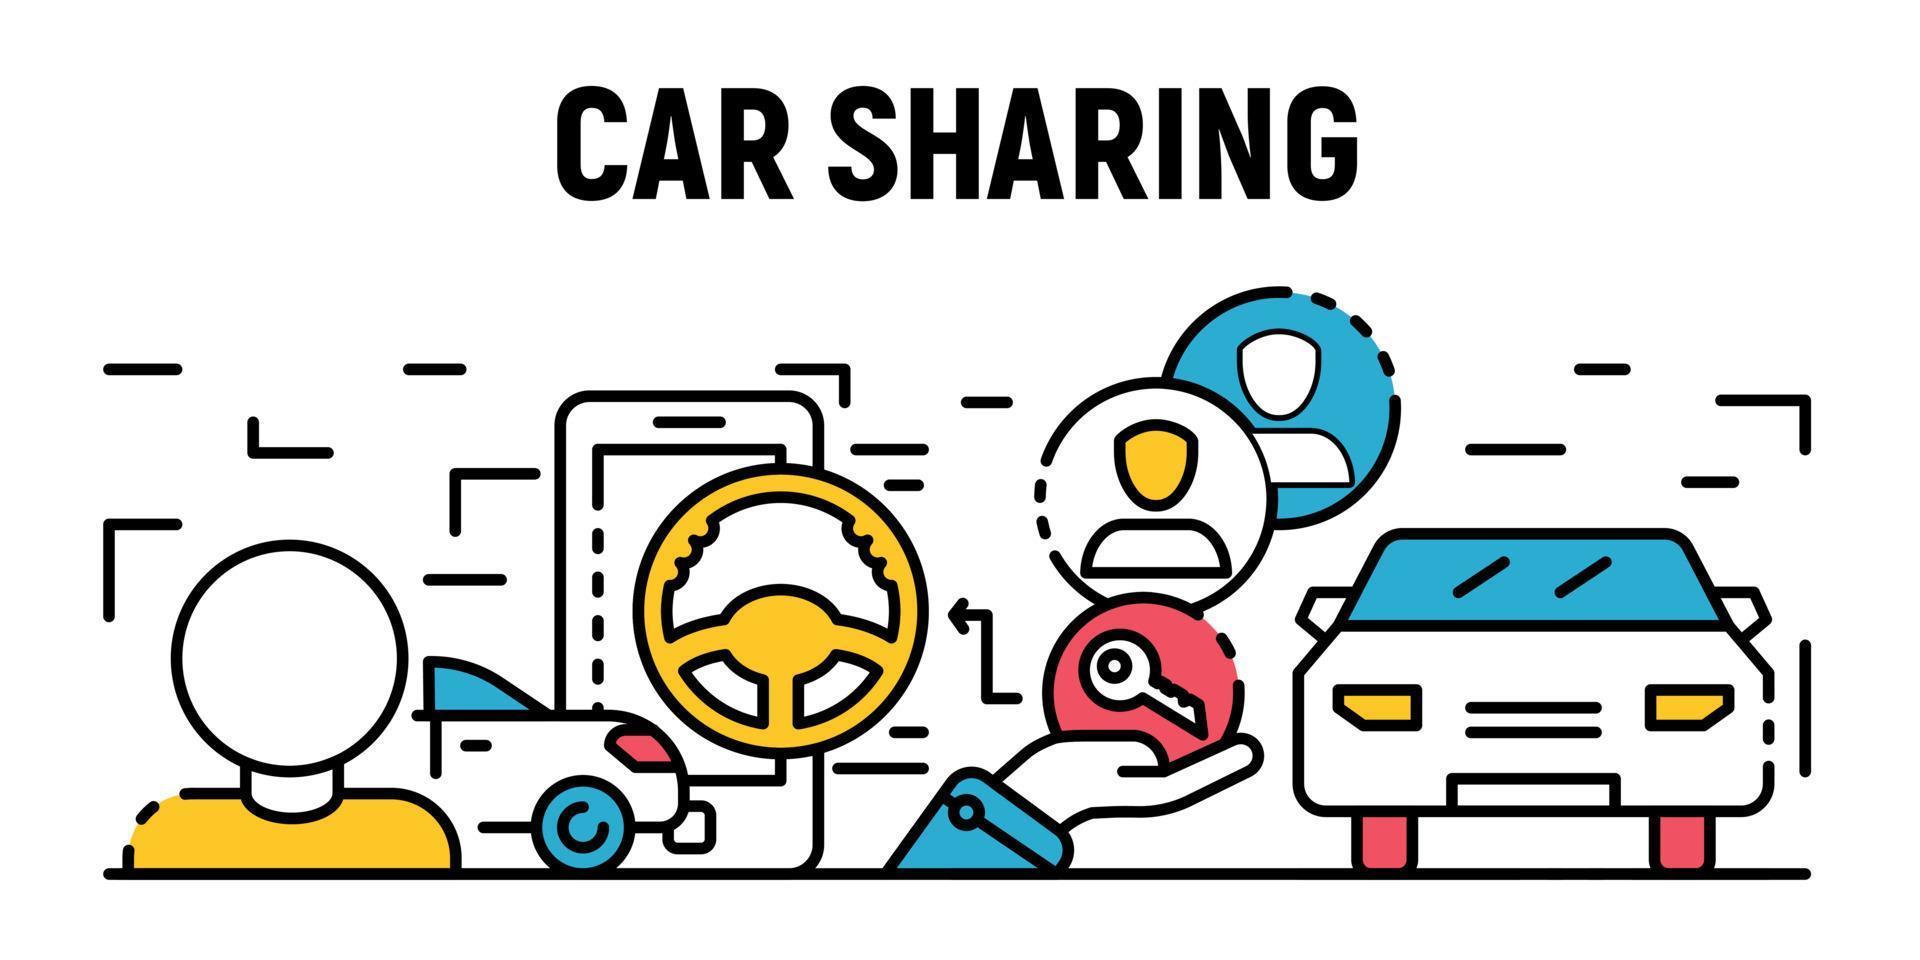 City car sharing banner, outline style vector